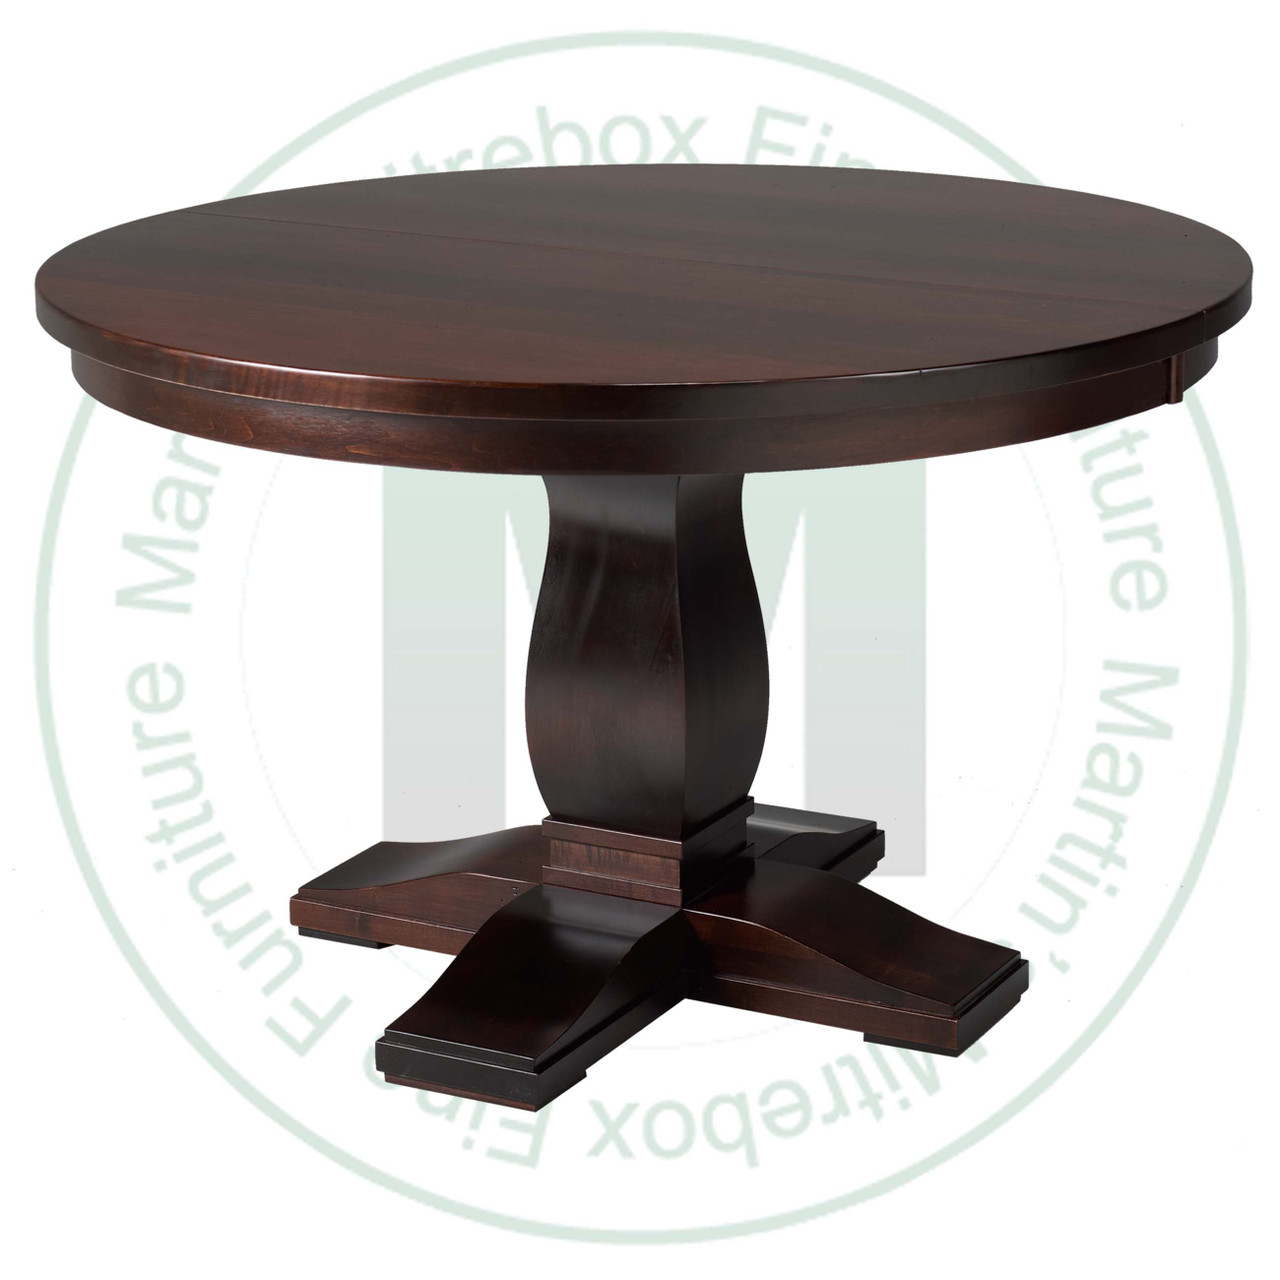 Oak Valencia Single Pedestal Table 60''D x 60''W x 30''H Round Solid Table. Table Has 1'' Thick Top.